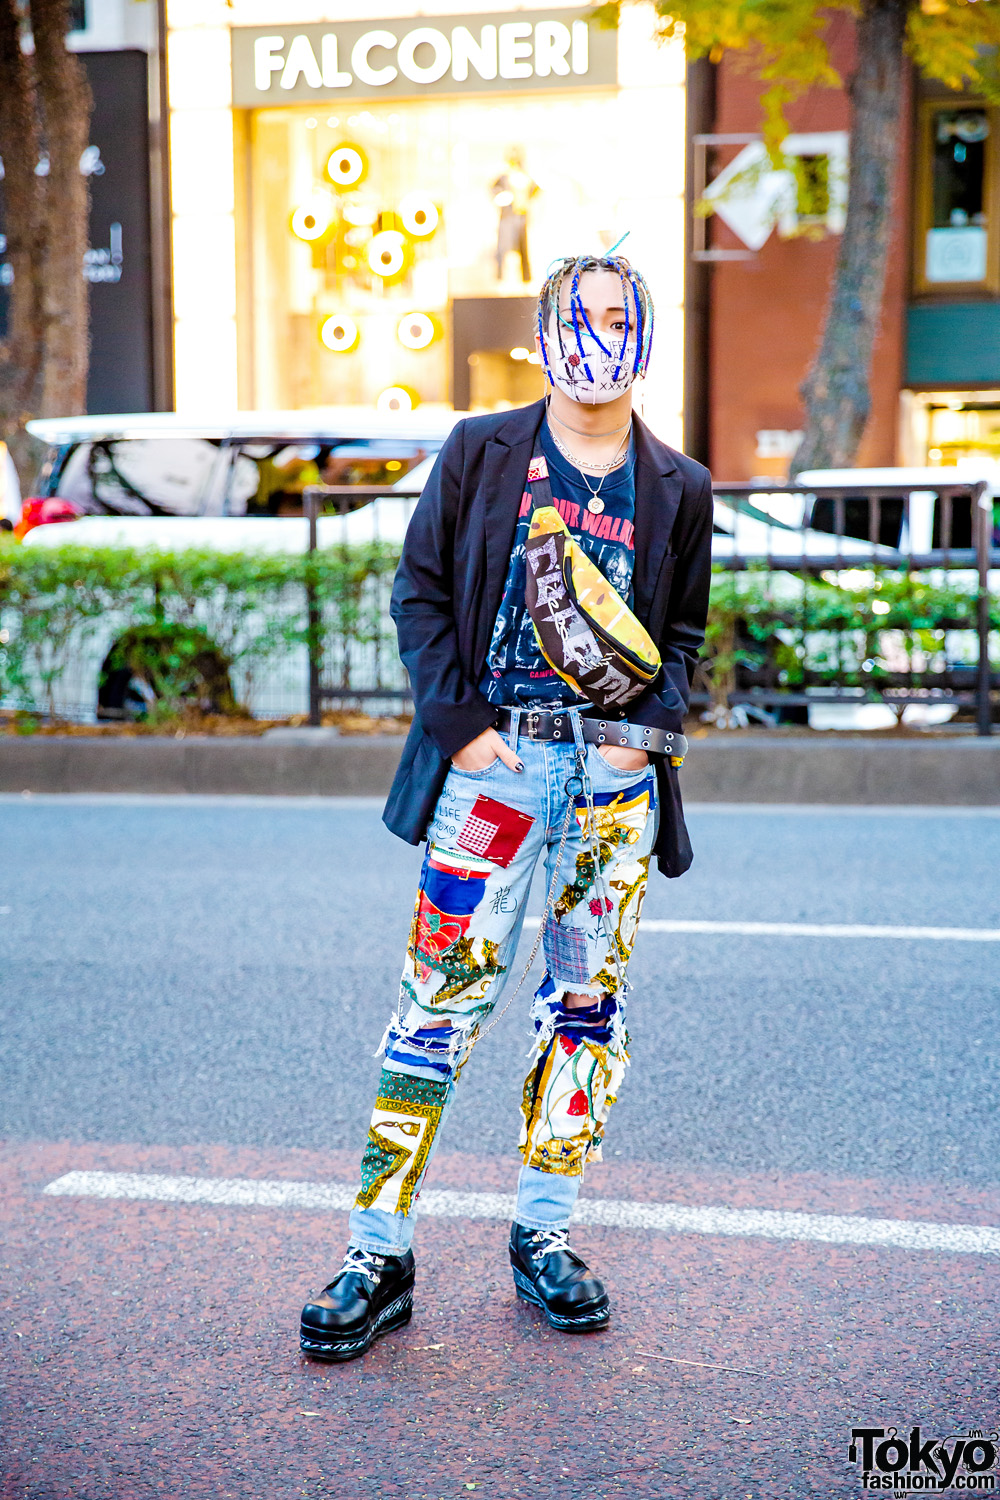 Japanese Street Style w/ Colorful Braids, Mask, Patchwork Jeans, Barbwire Boots & Cote Mer Waist Bag